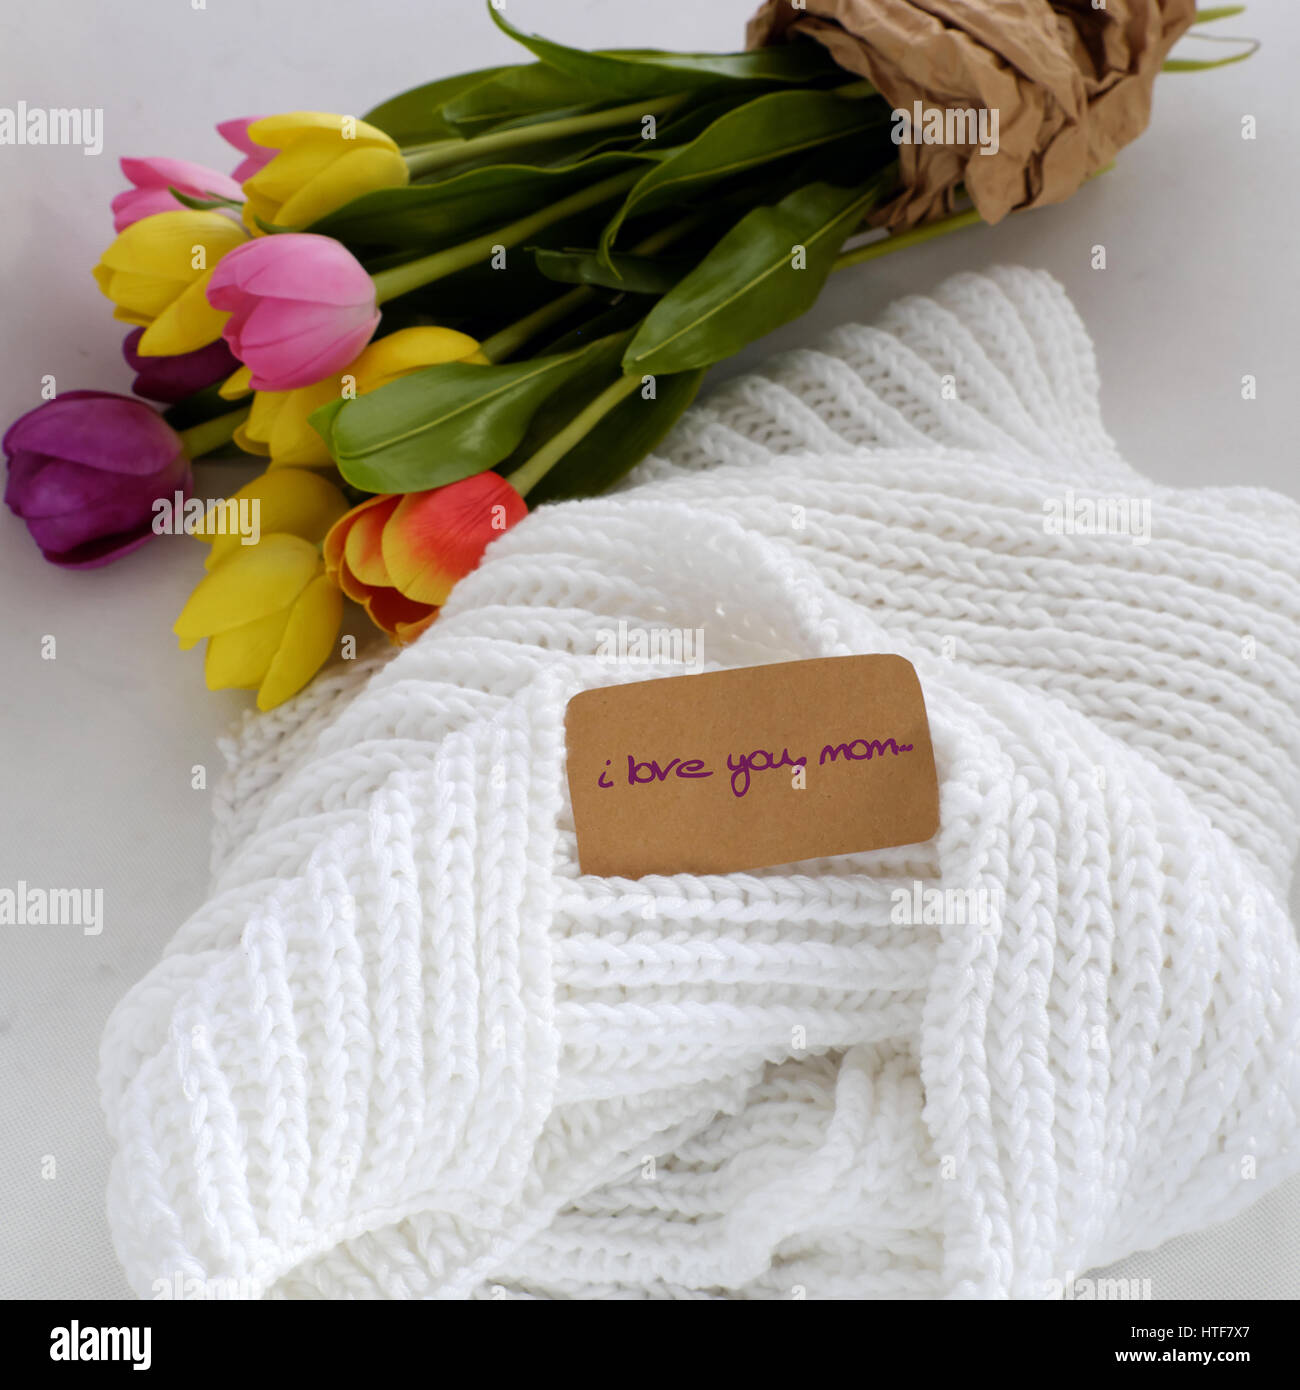 Happy mother day, meaningful handmade gift with knitted white scarf, tulip flower bouquet from clay, gratitude and thank mom for love in special day Stock Photo